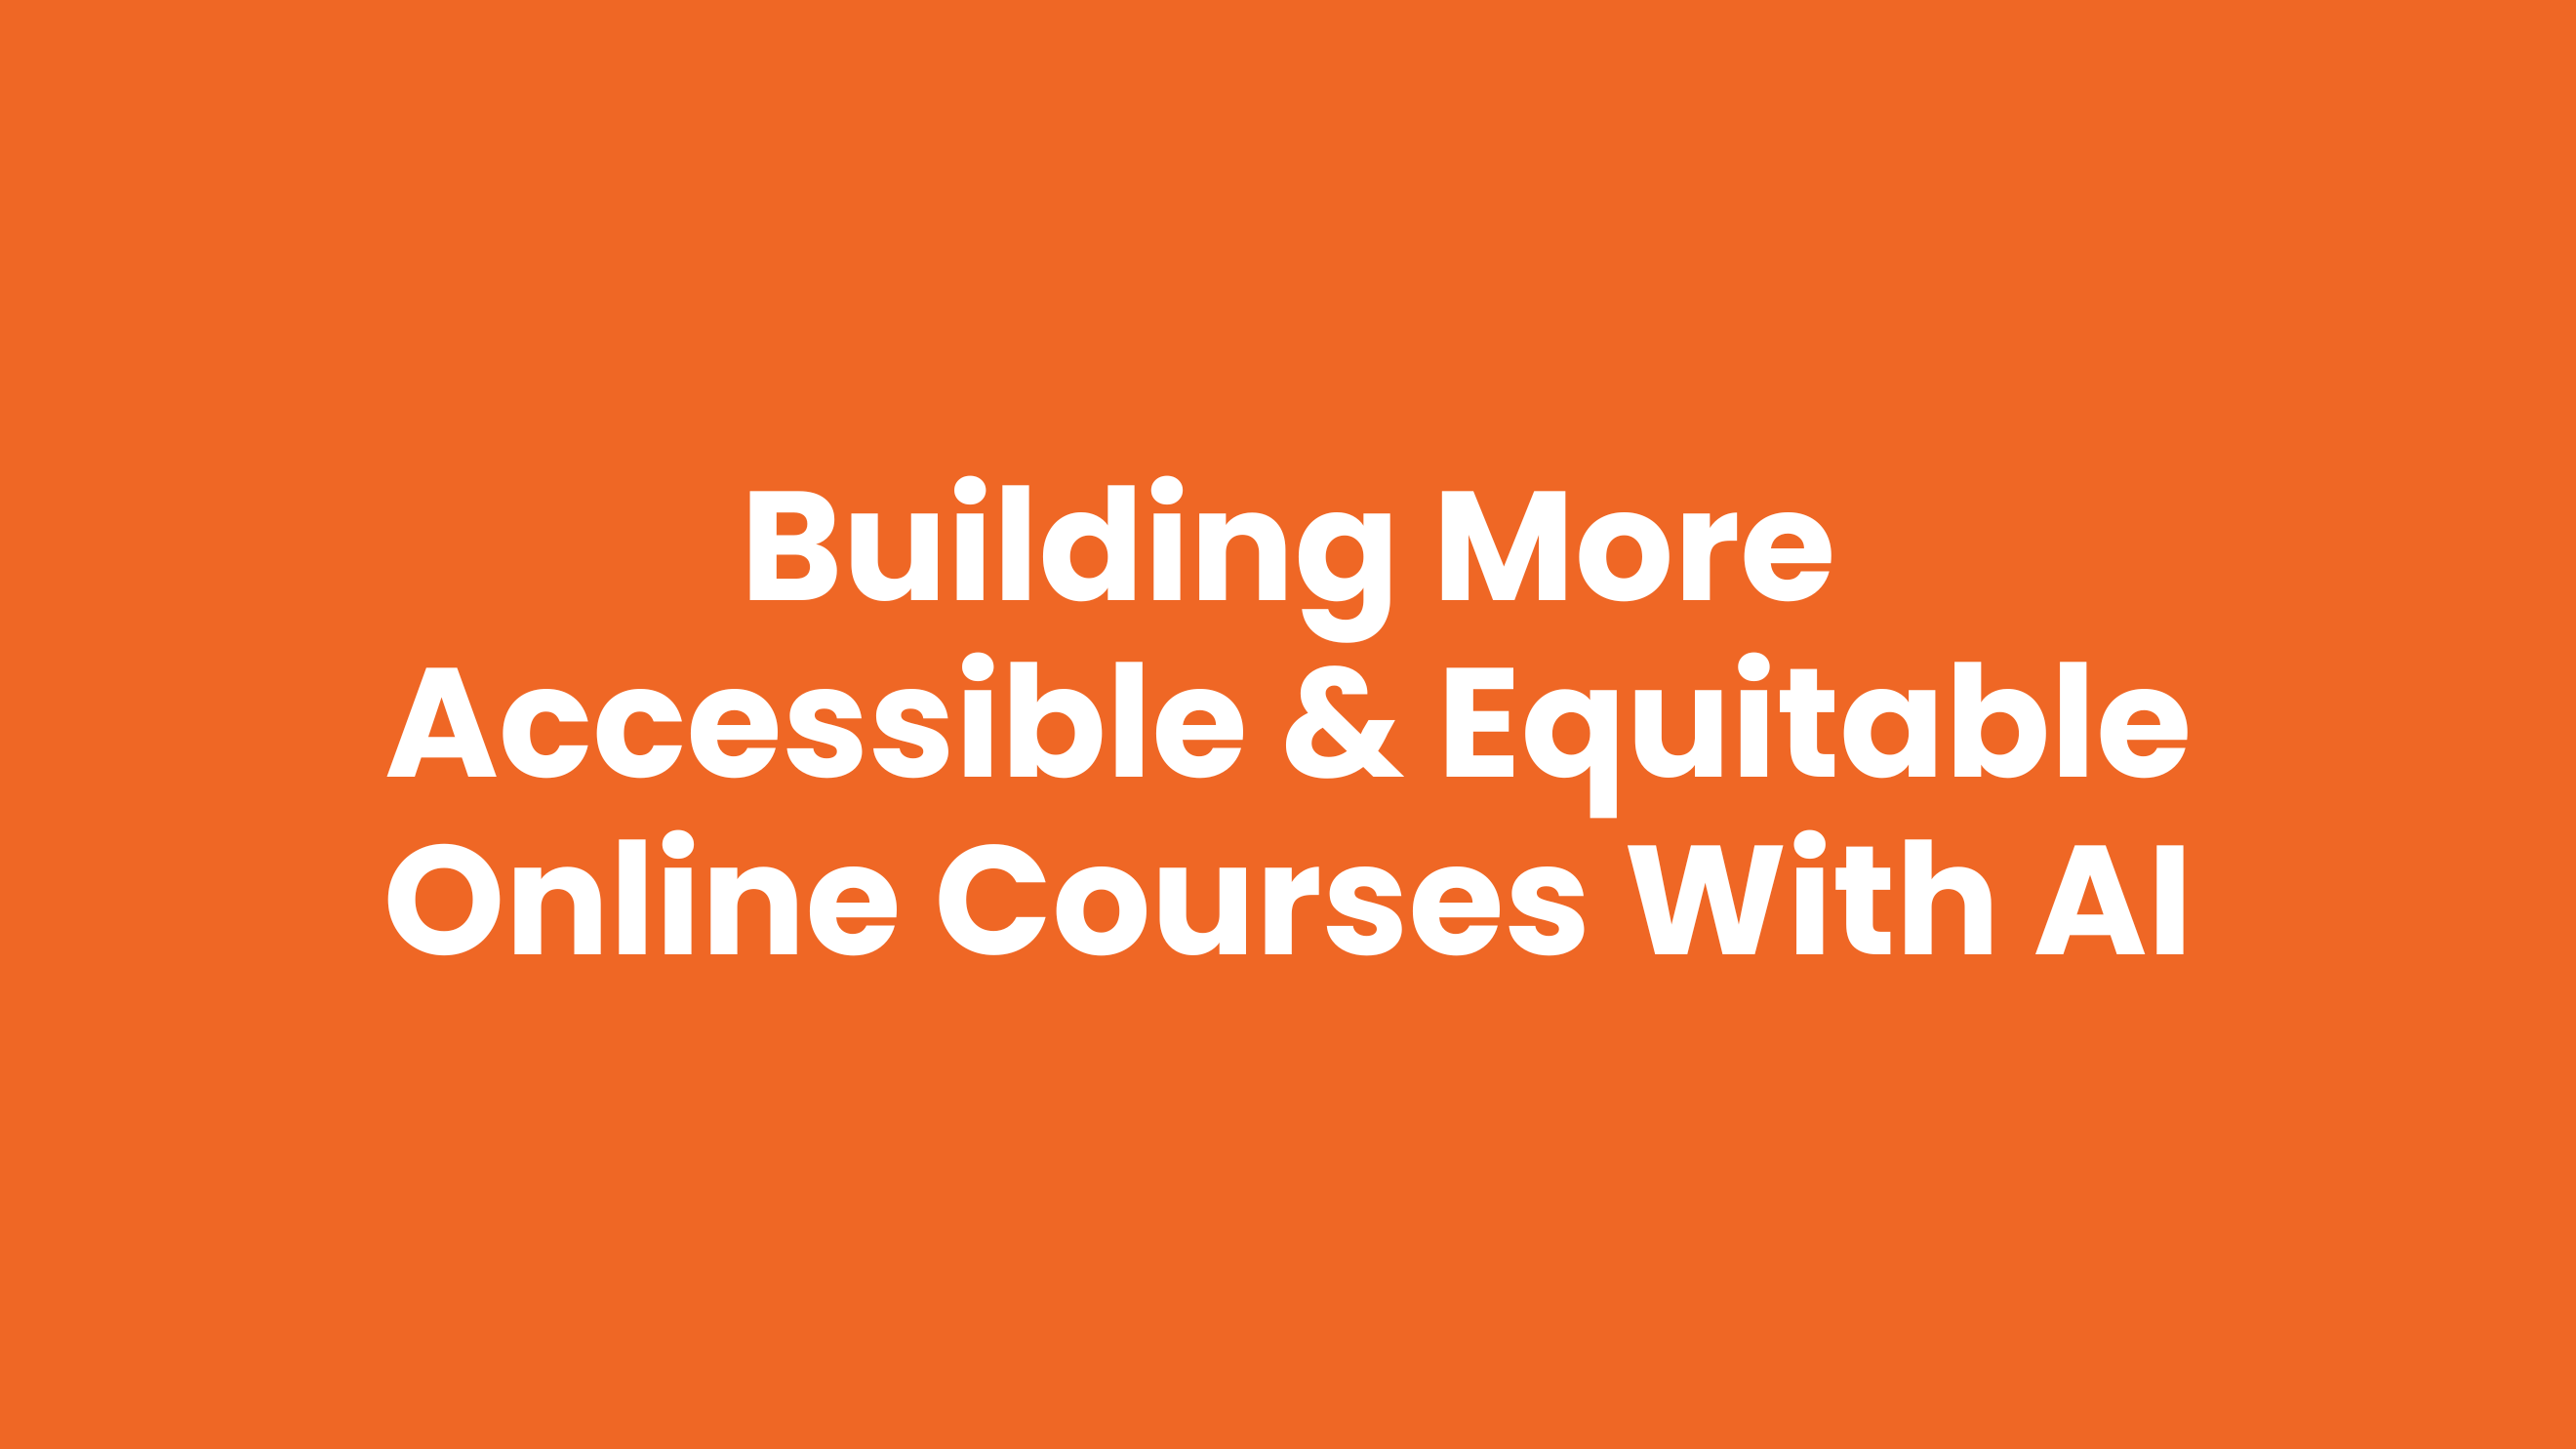 How to make online courses accessible and equitable with AI tools